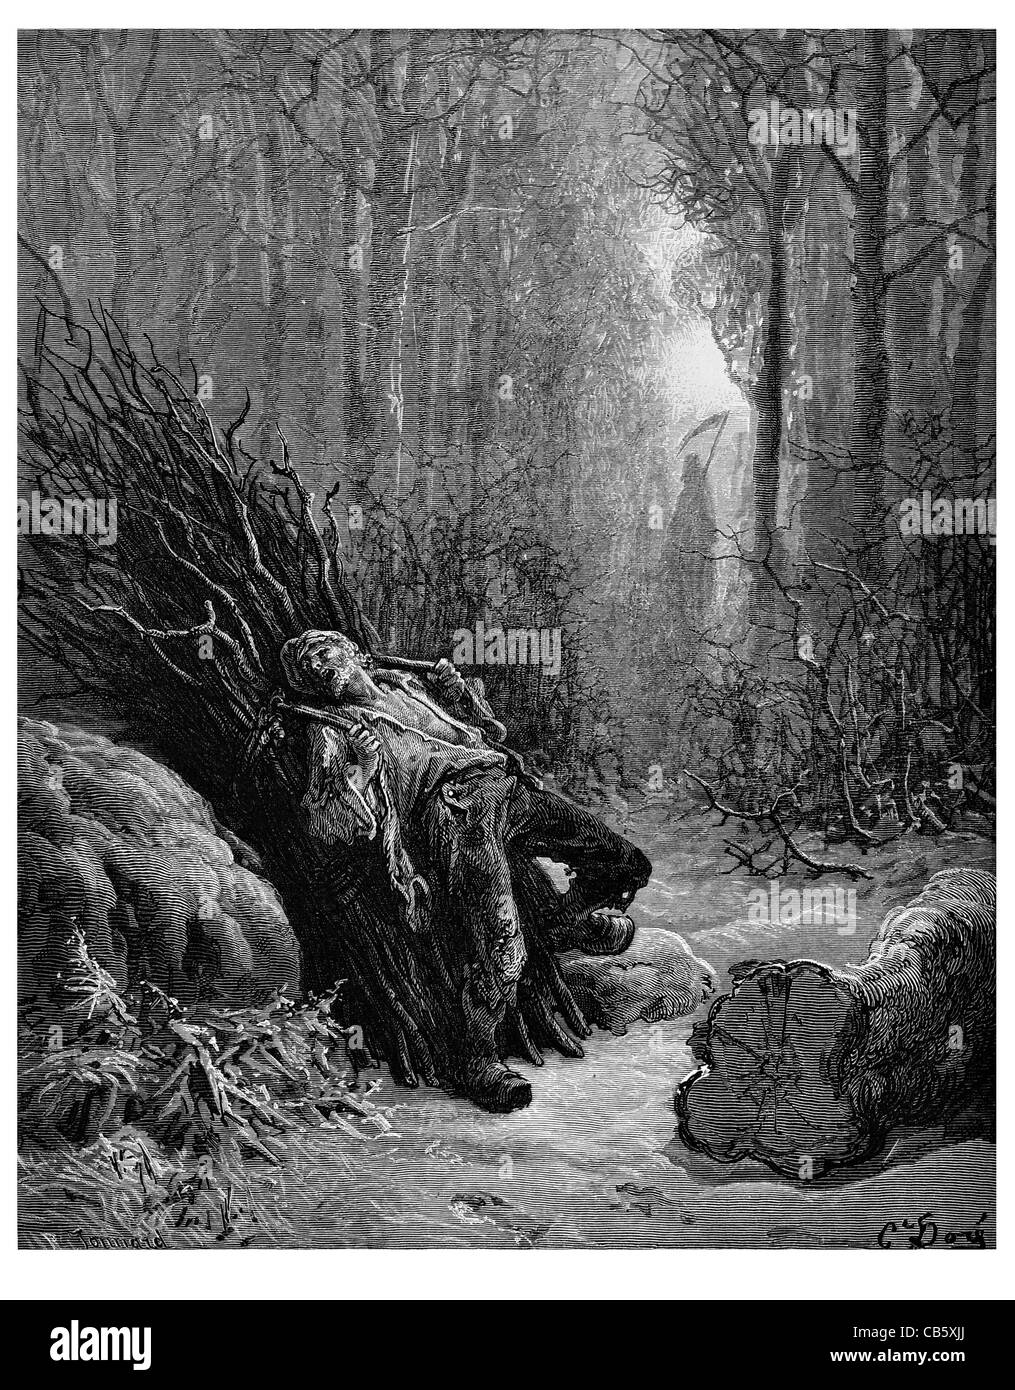 Fontaine Le mort et le bucheron The Death and the Woodcutter forester forest timber woods dying heavy load grim reaper scythe Stock Photo